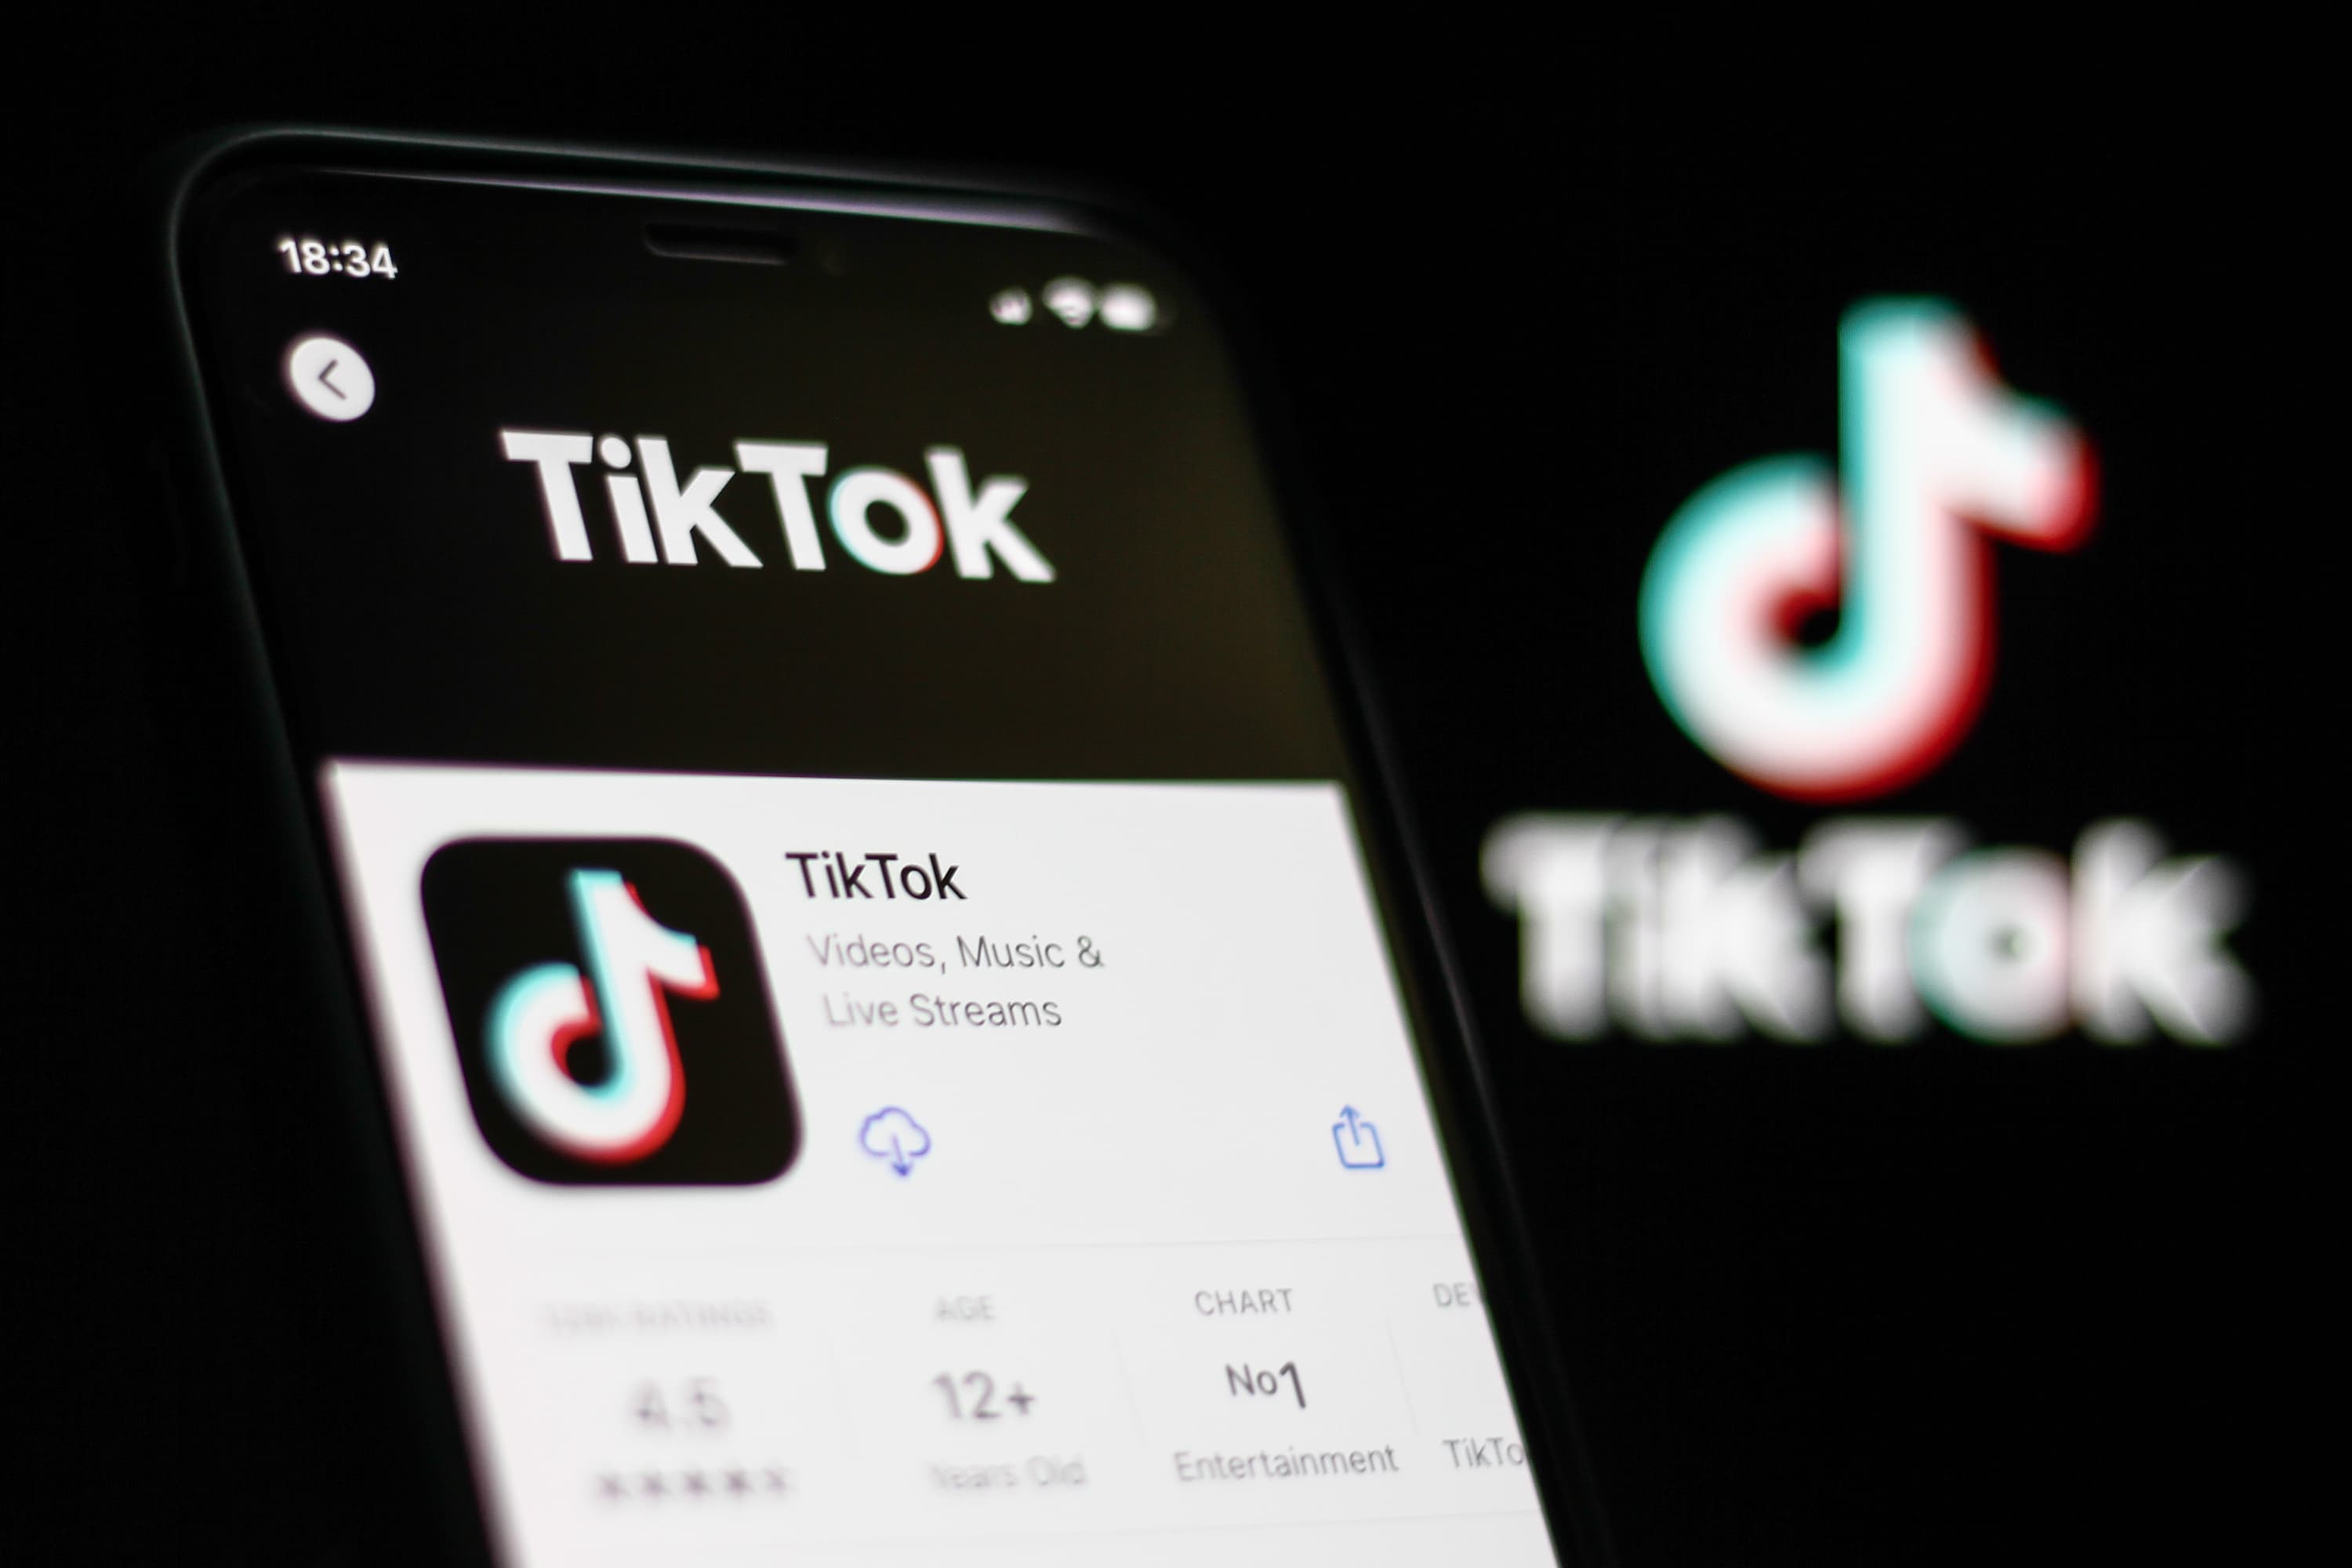  On TikTok, What does “Friends Only” Mean?